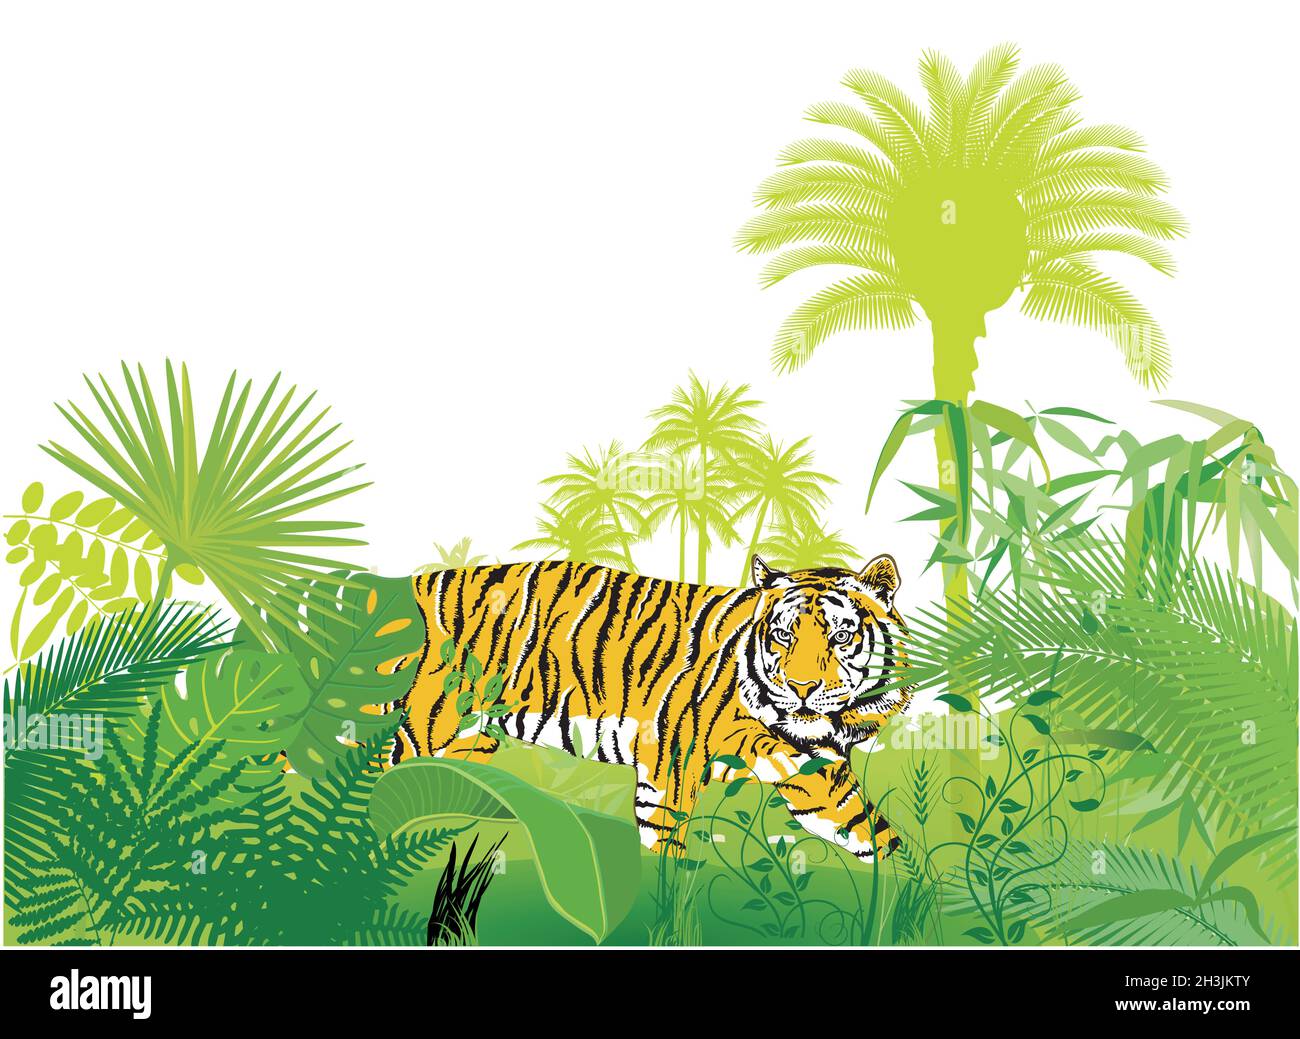 Tiger in the jungle, illustration vector Stock Vector